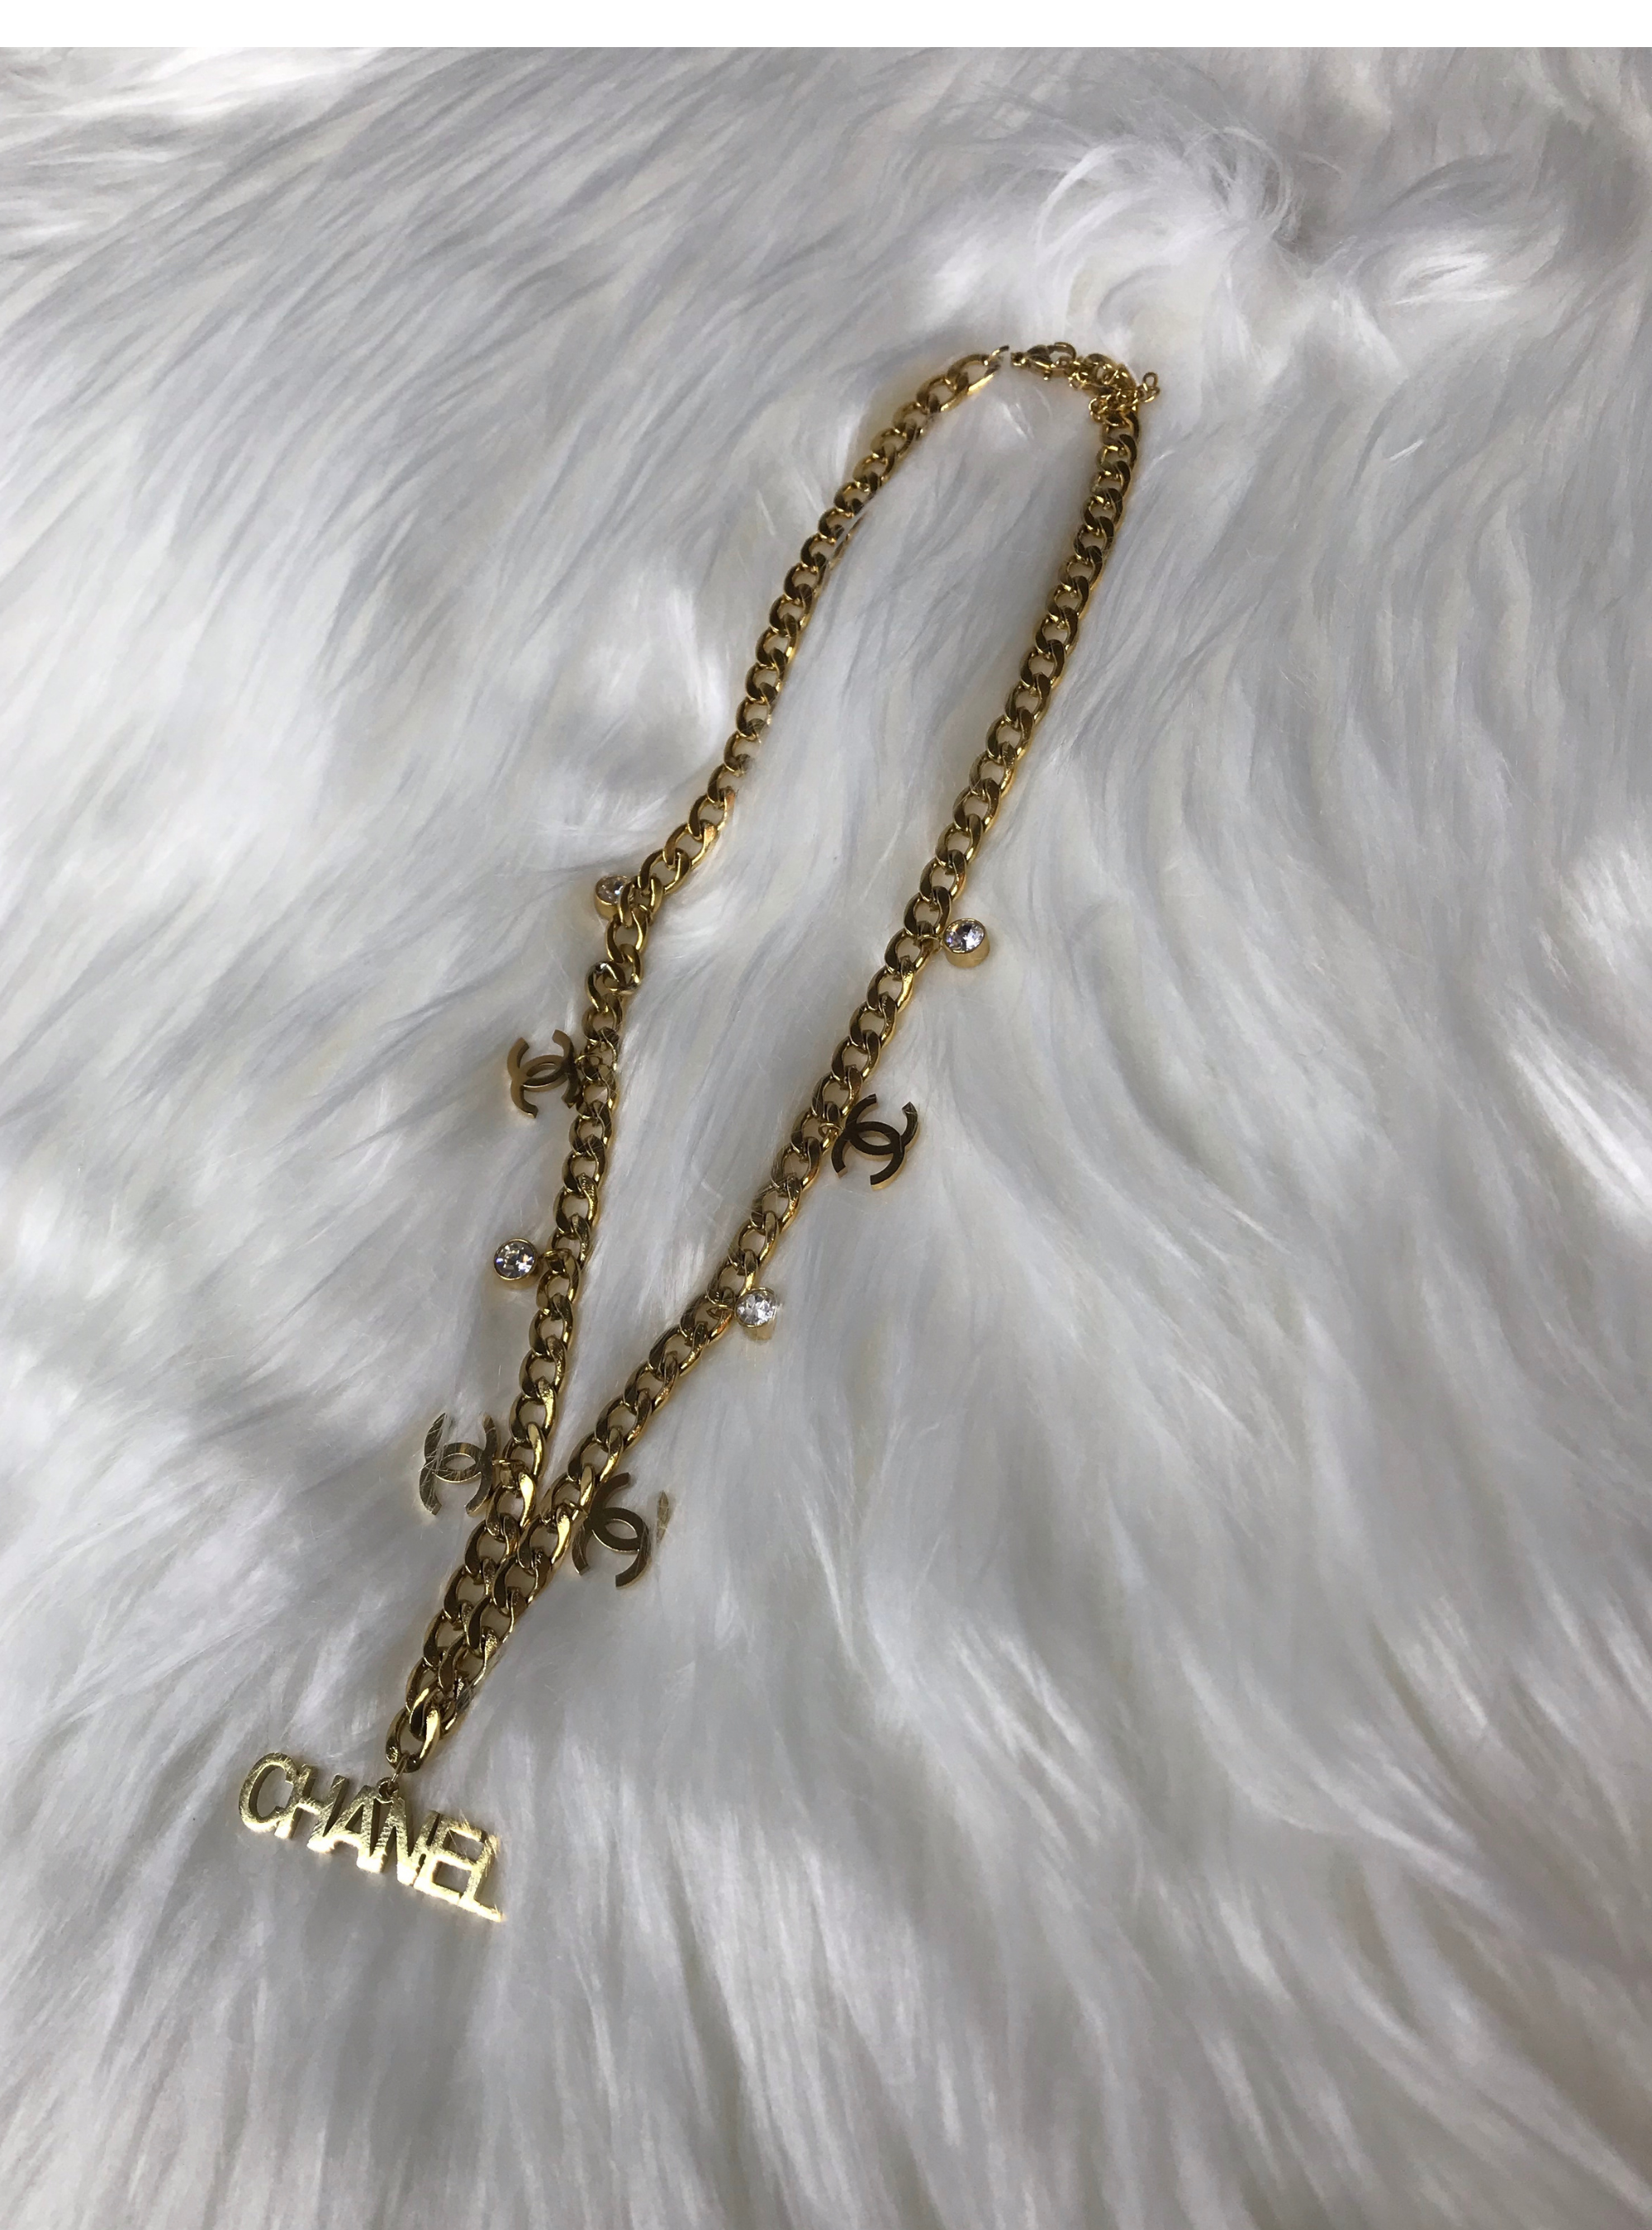 Authentic Reworked Chanel Necklace Design 2